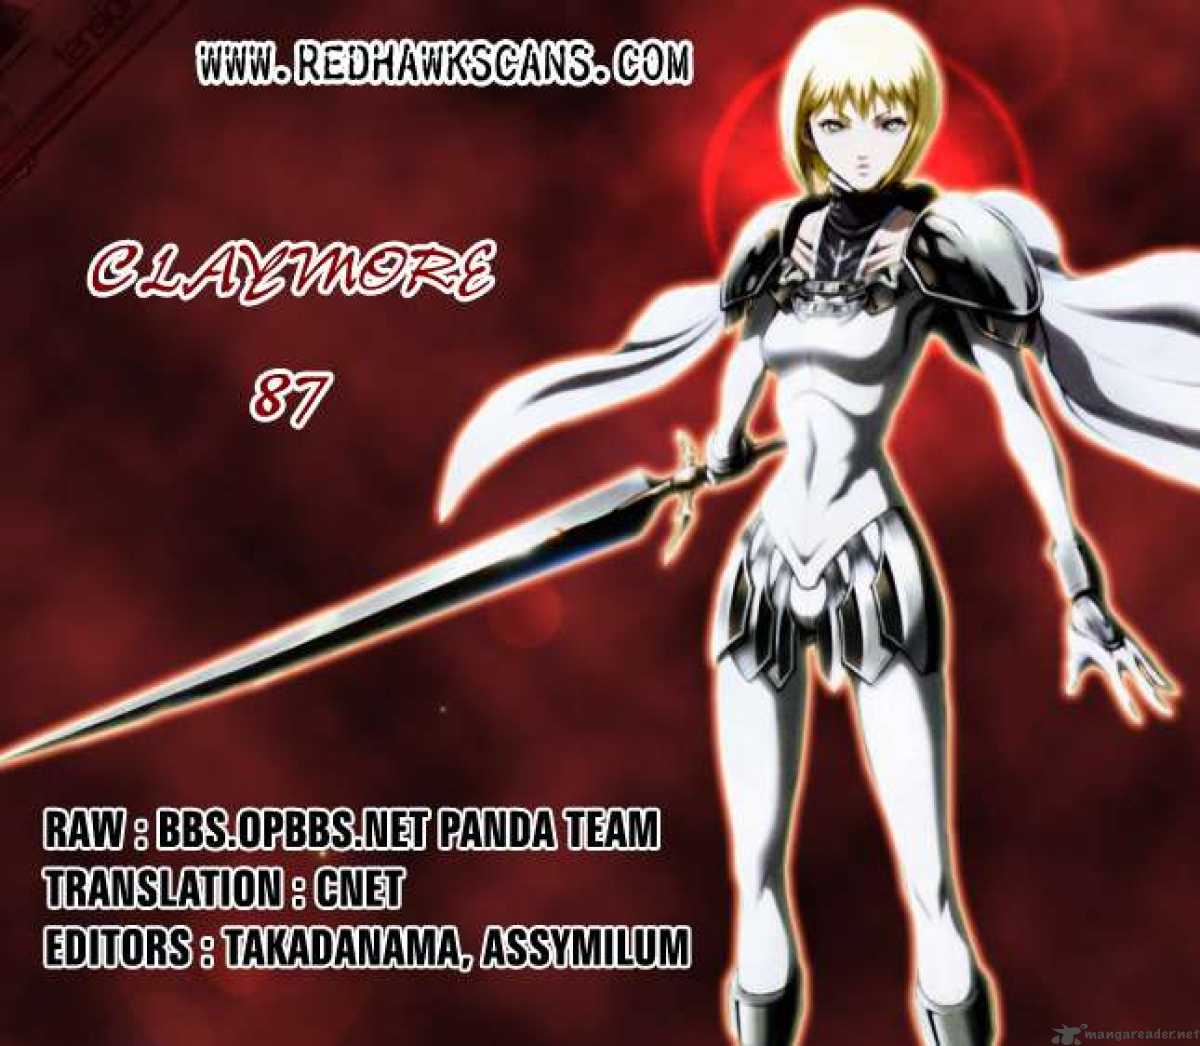 Claymore 87 22